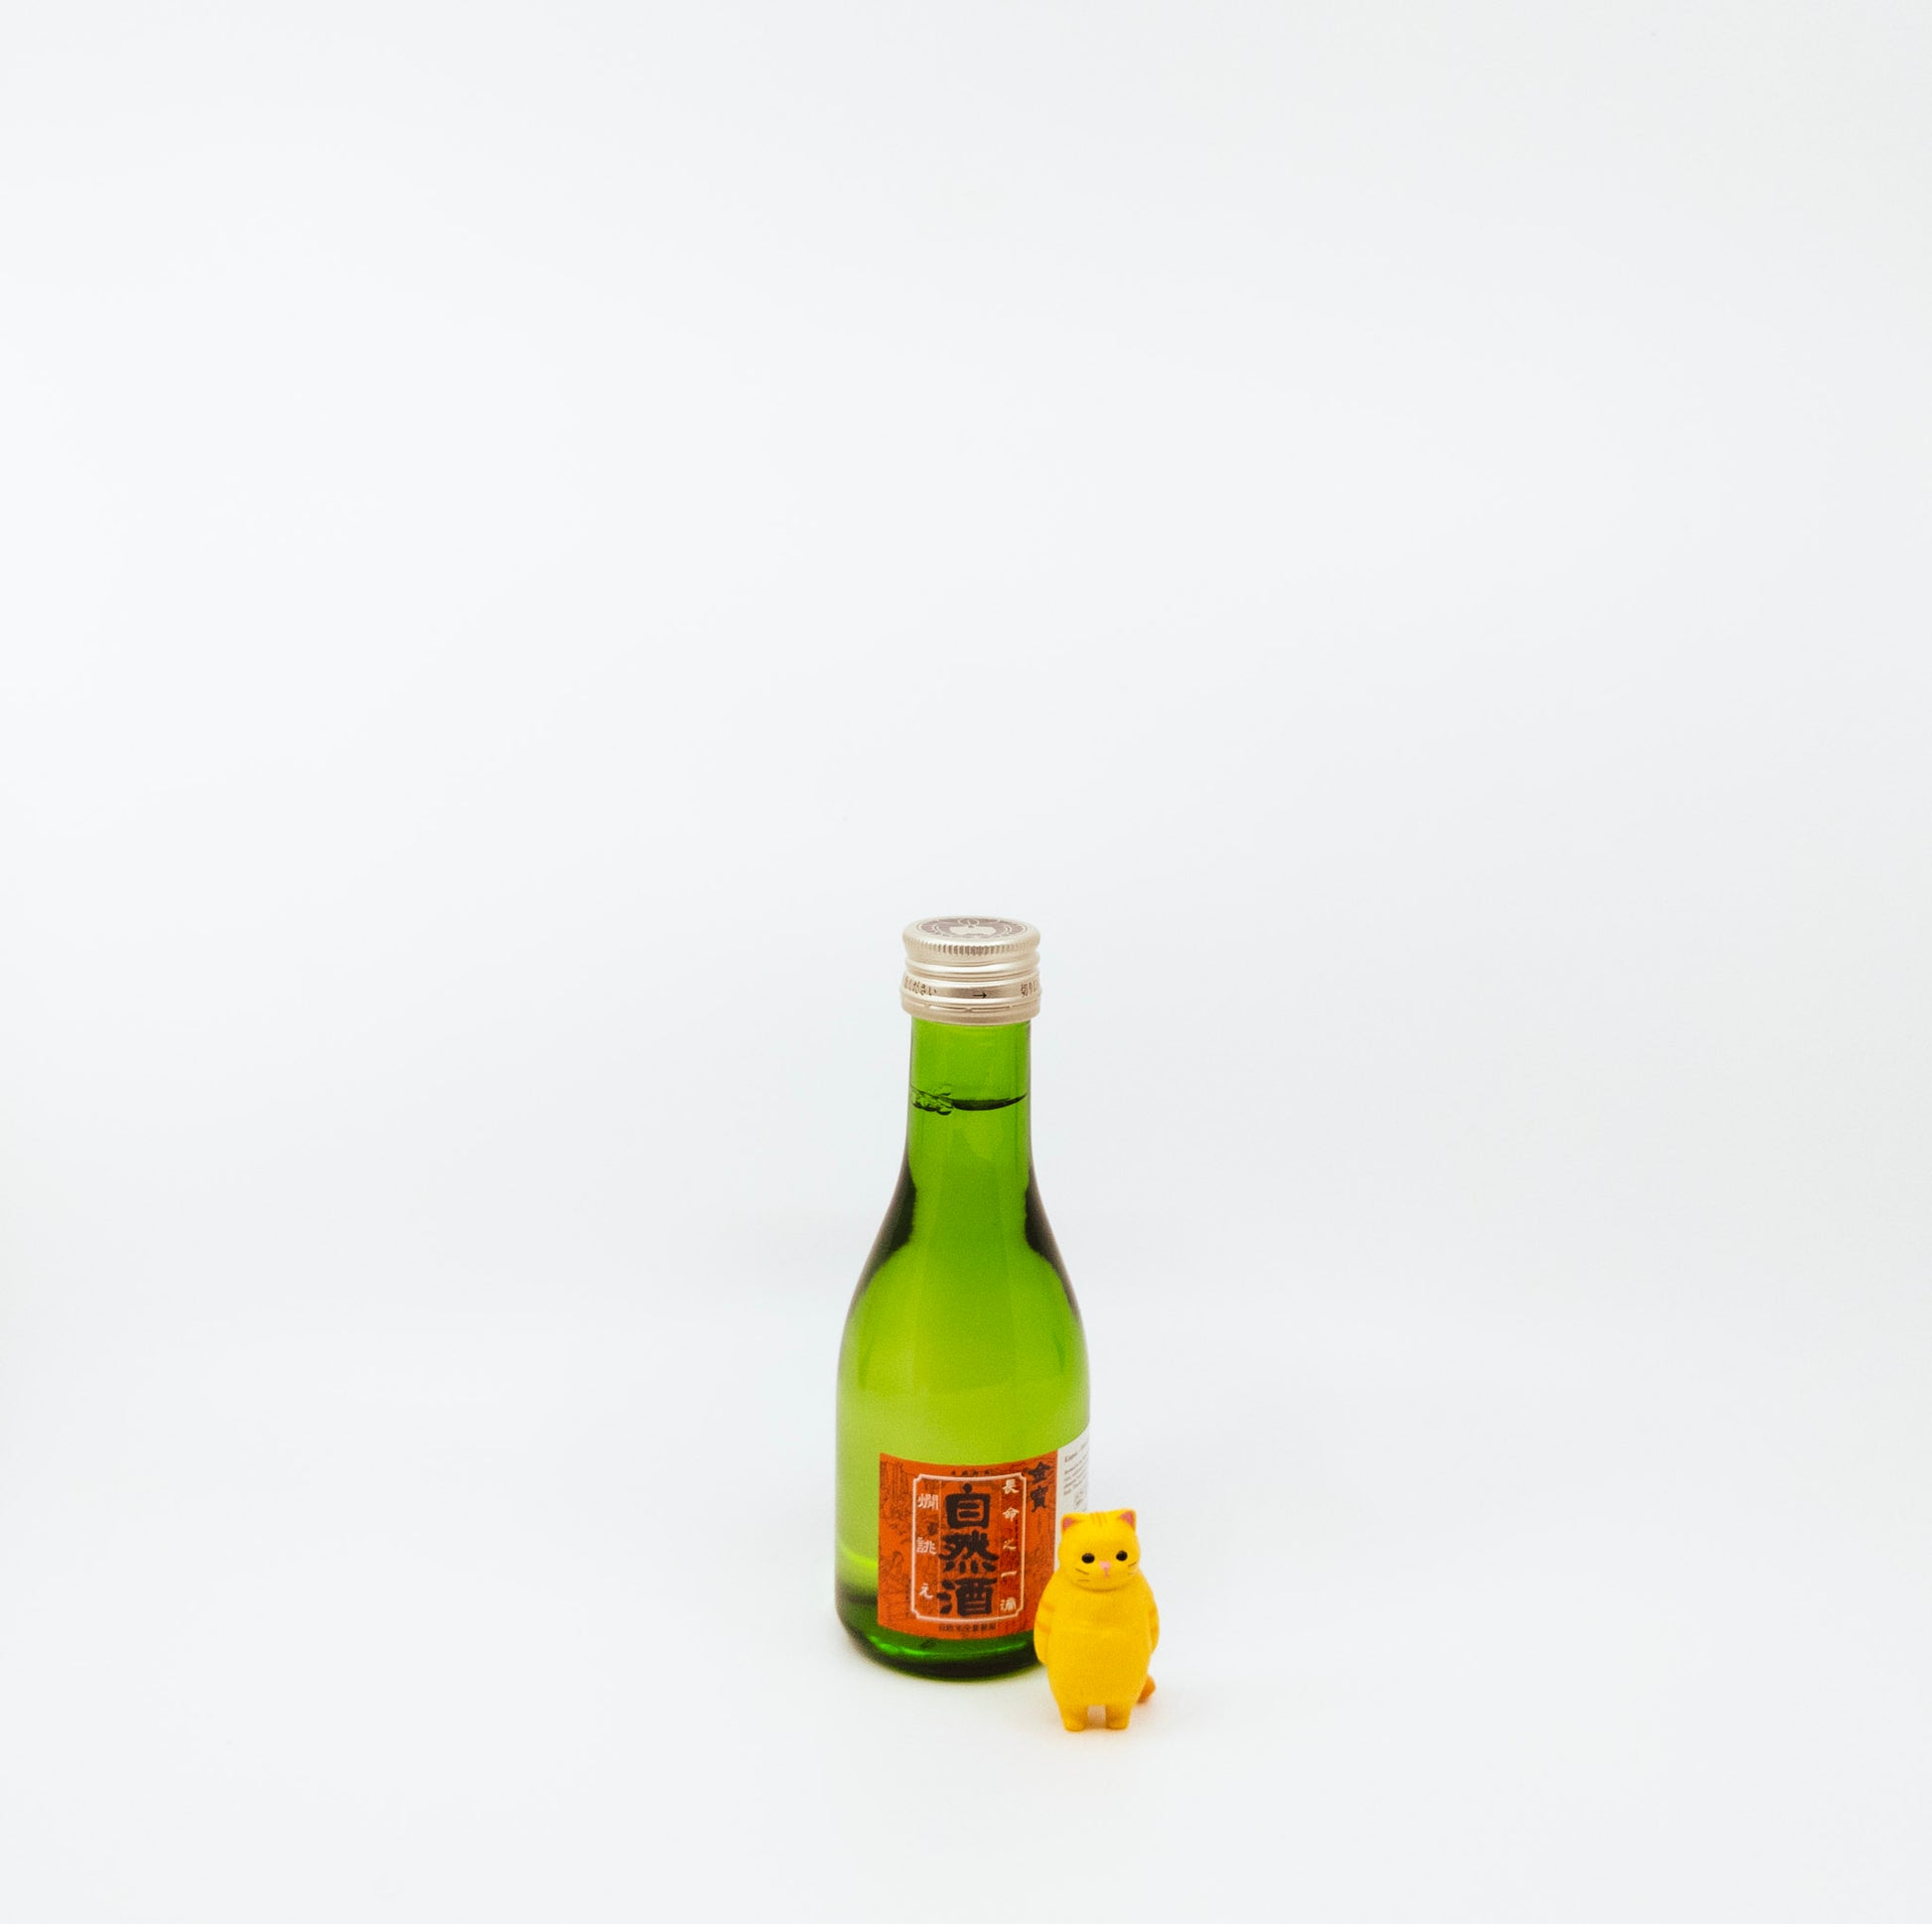 small green bottle with cat figurine next to it